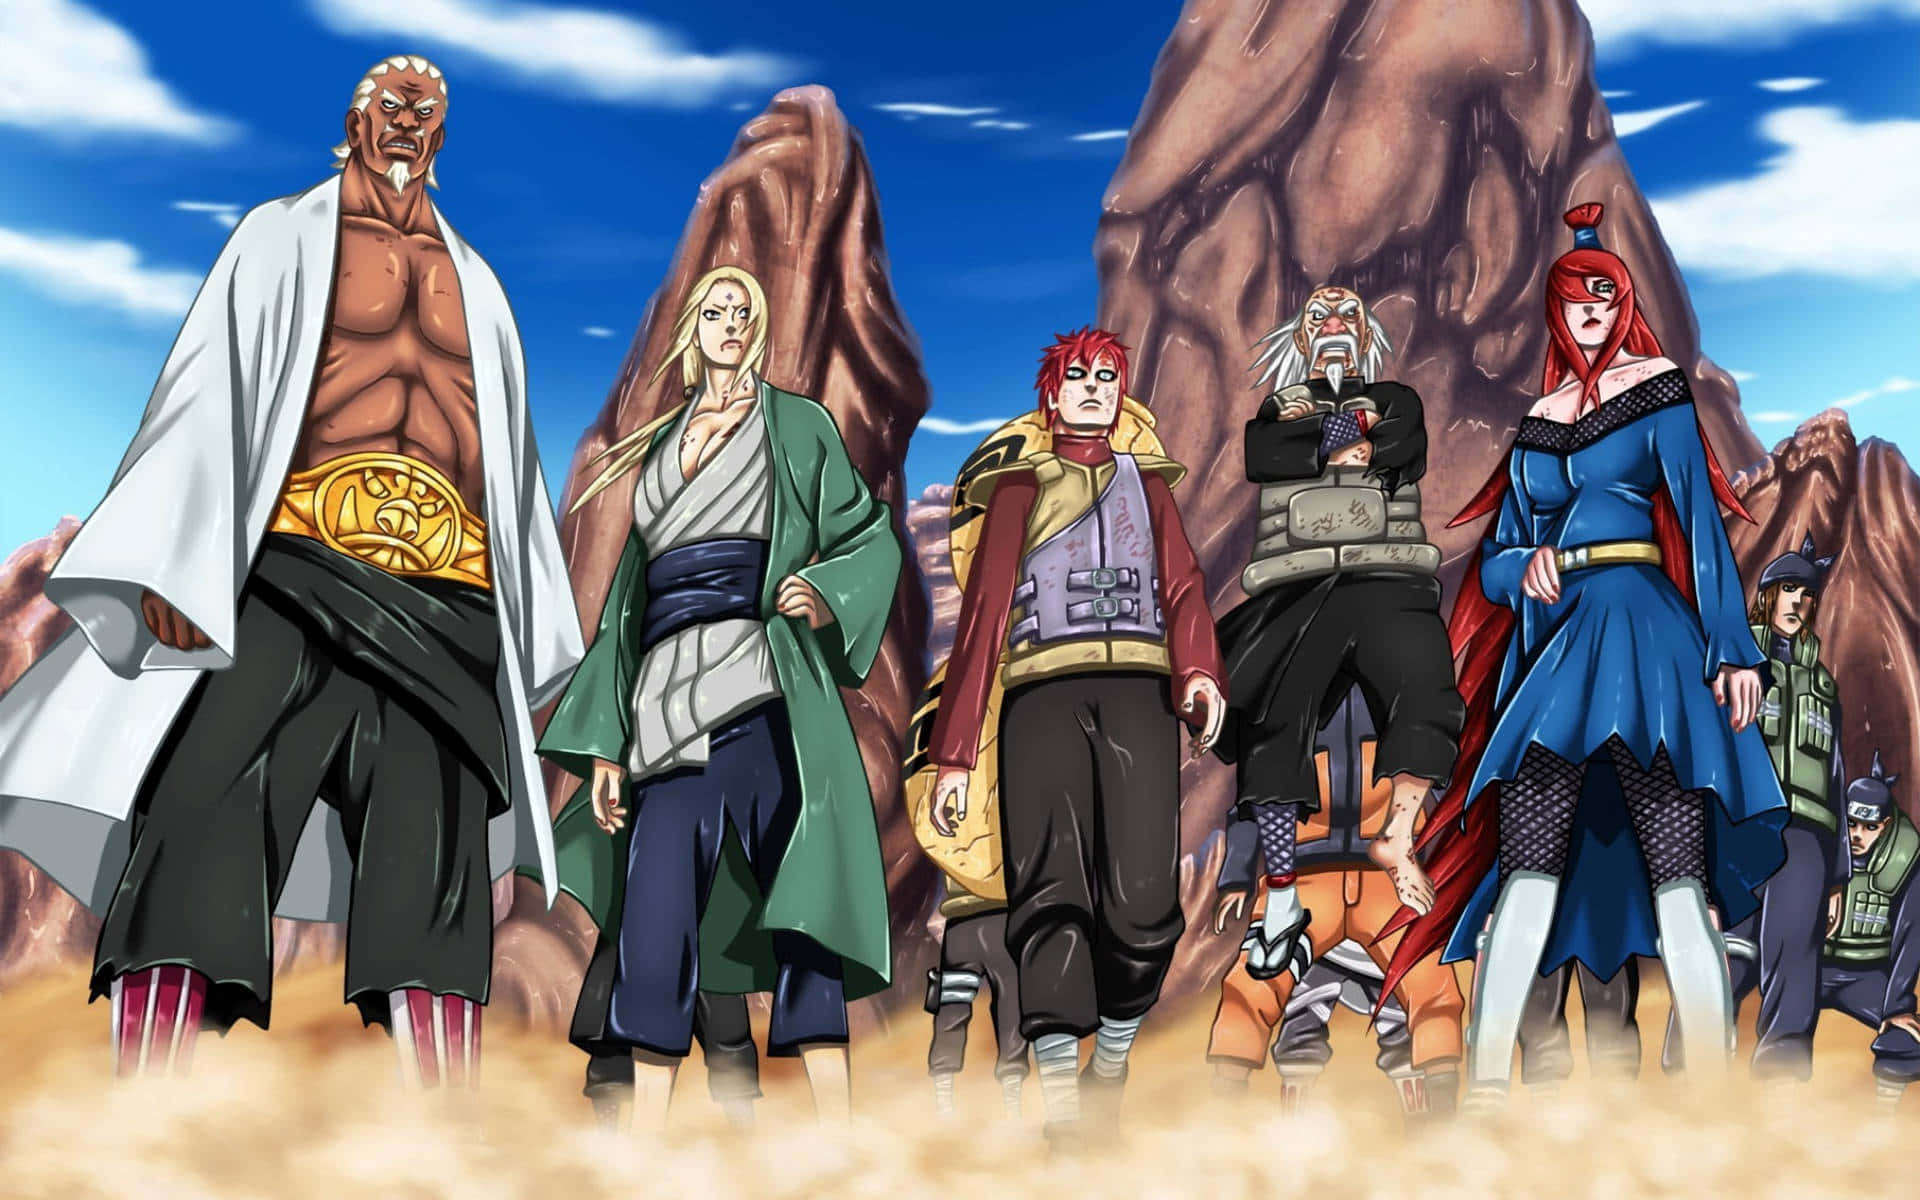 The Five Kage Summit in action, showcasing the leaders of the five great ninja villages. Wallpaper